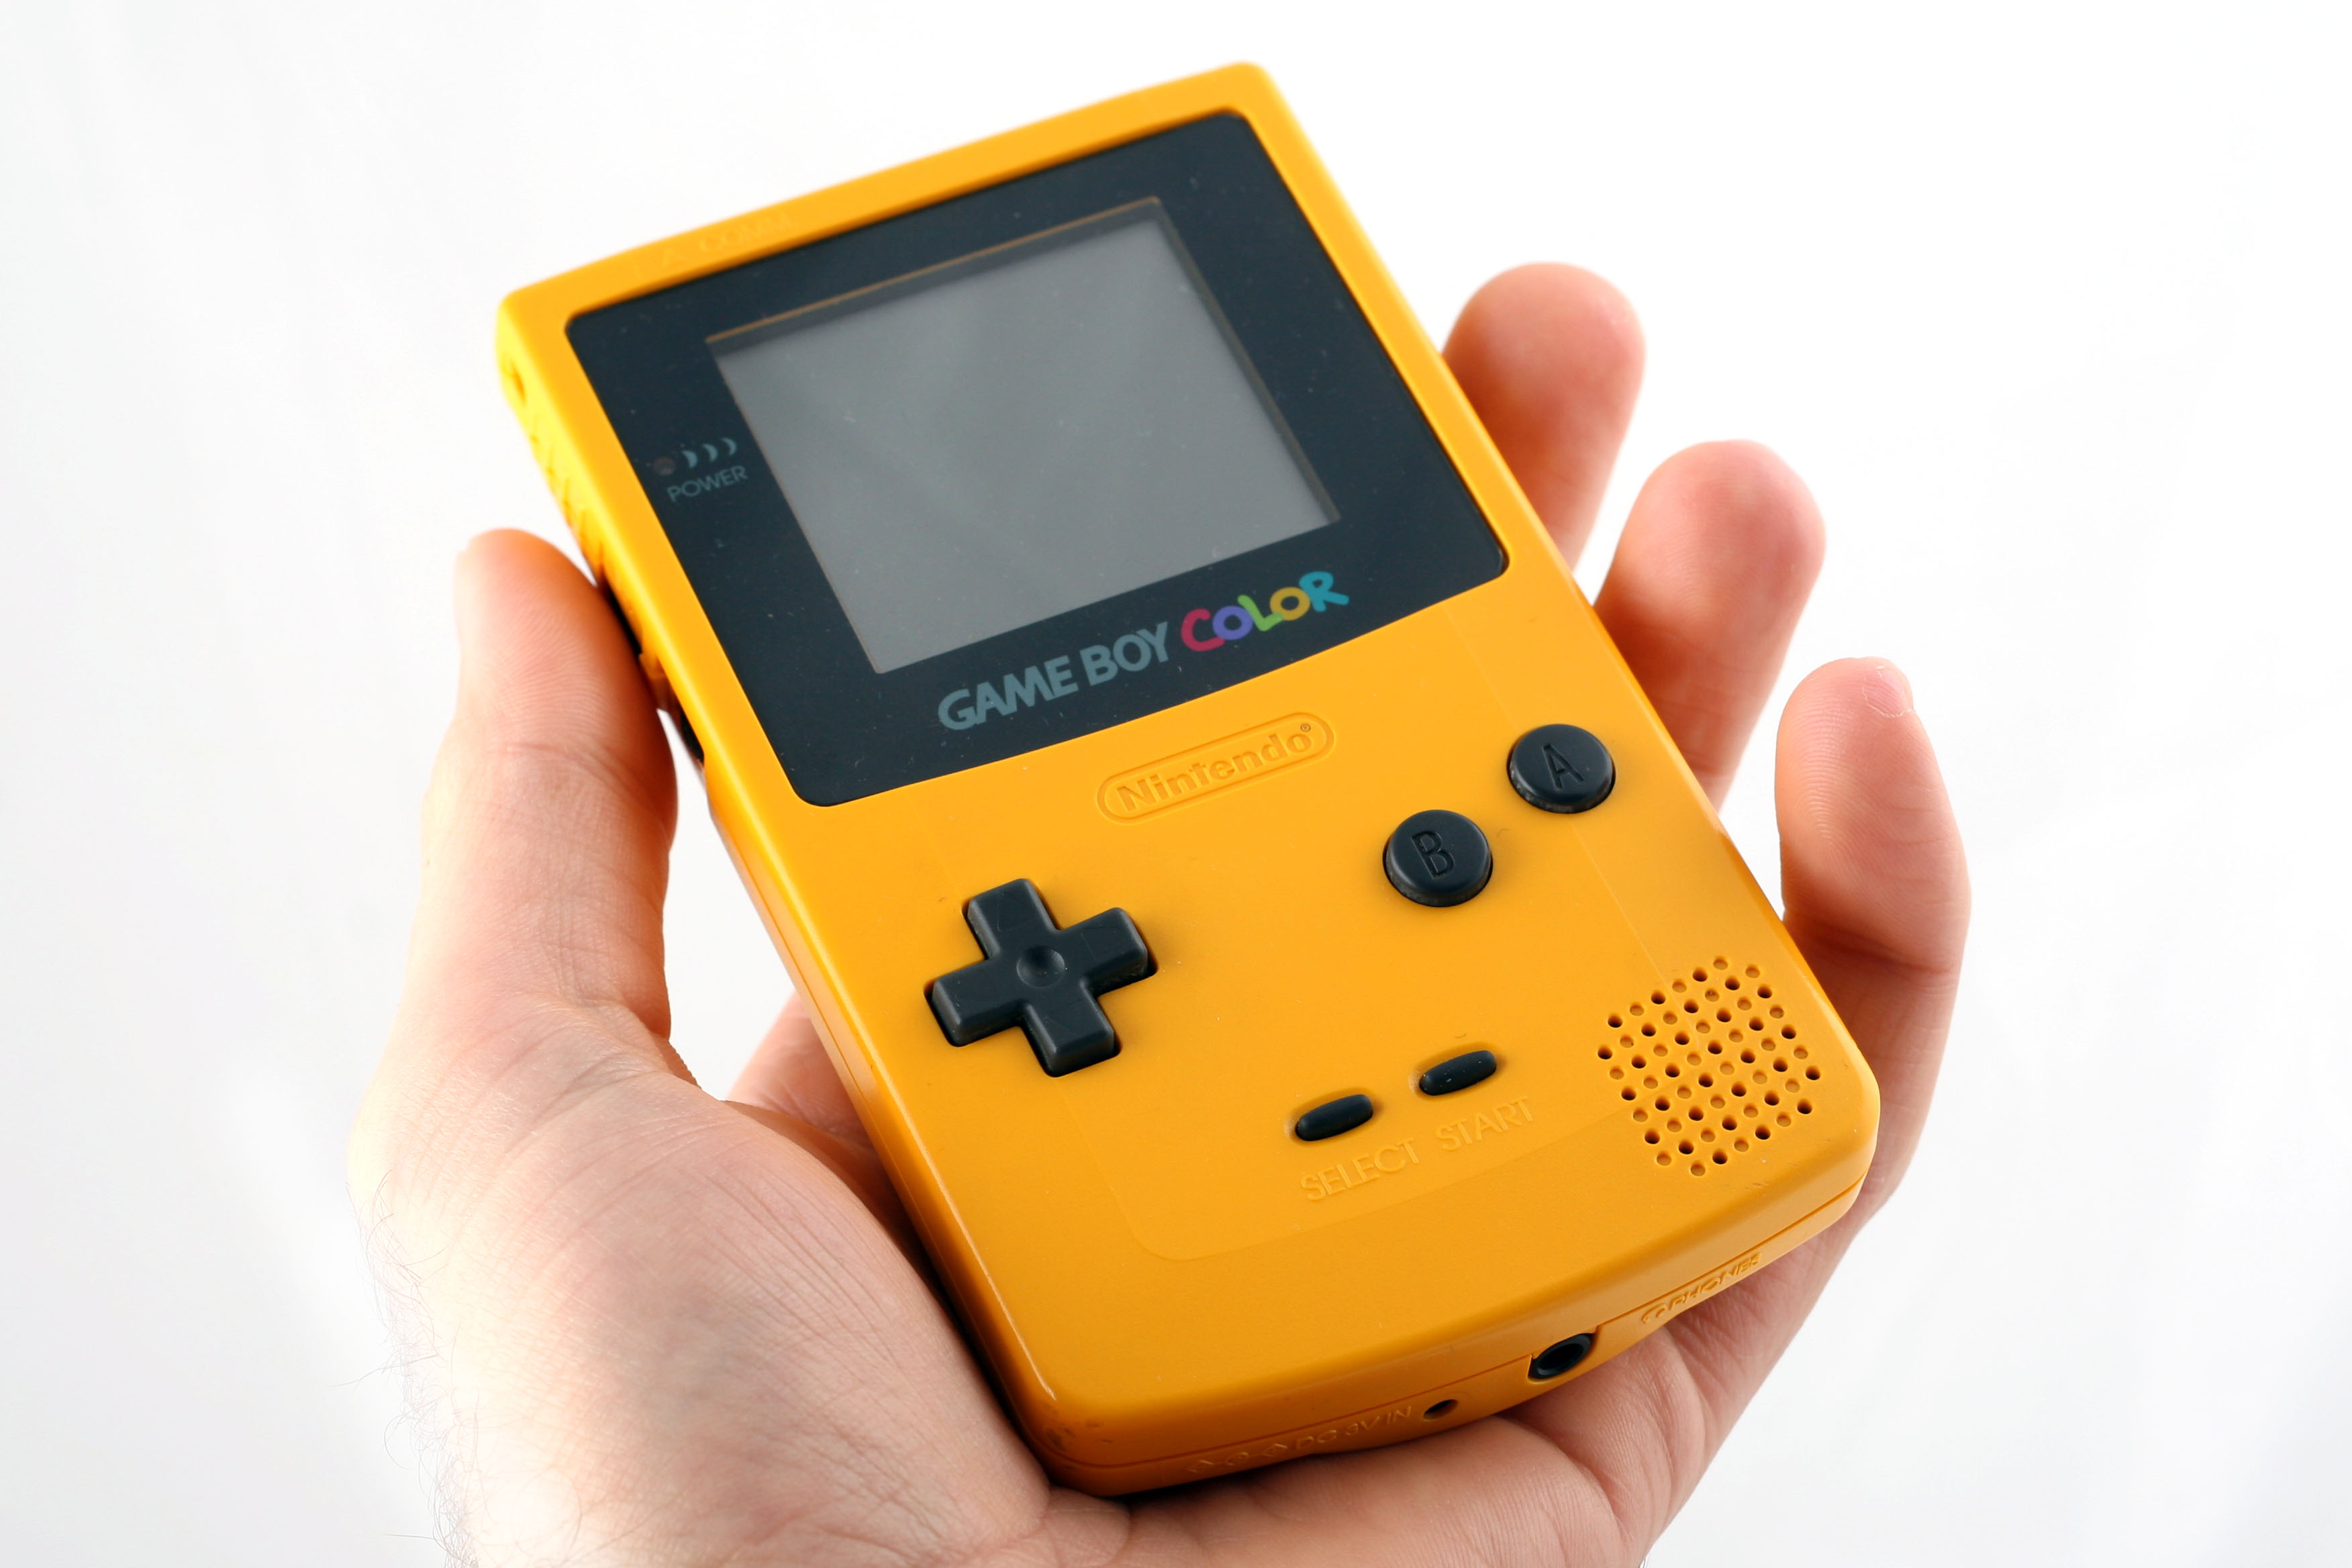 Game Boy Color - Simple English Wikipedia, the free encyclopedia